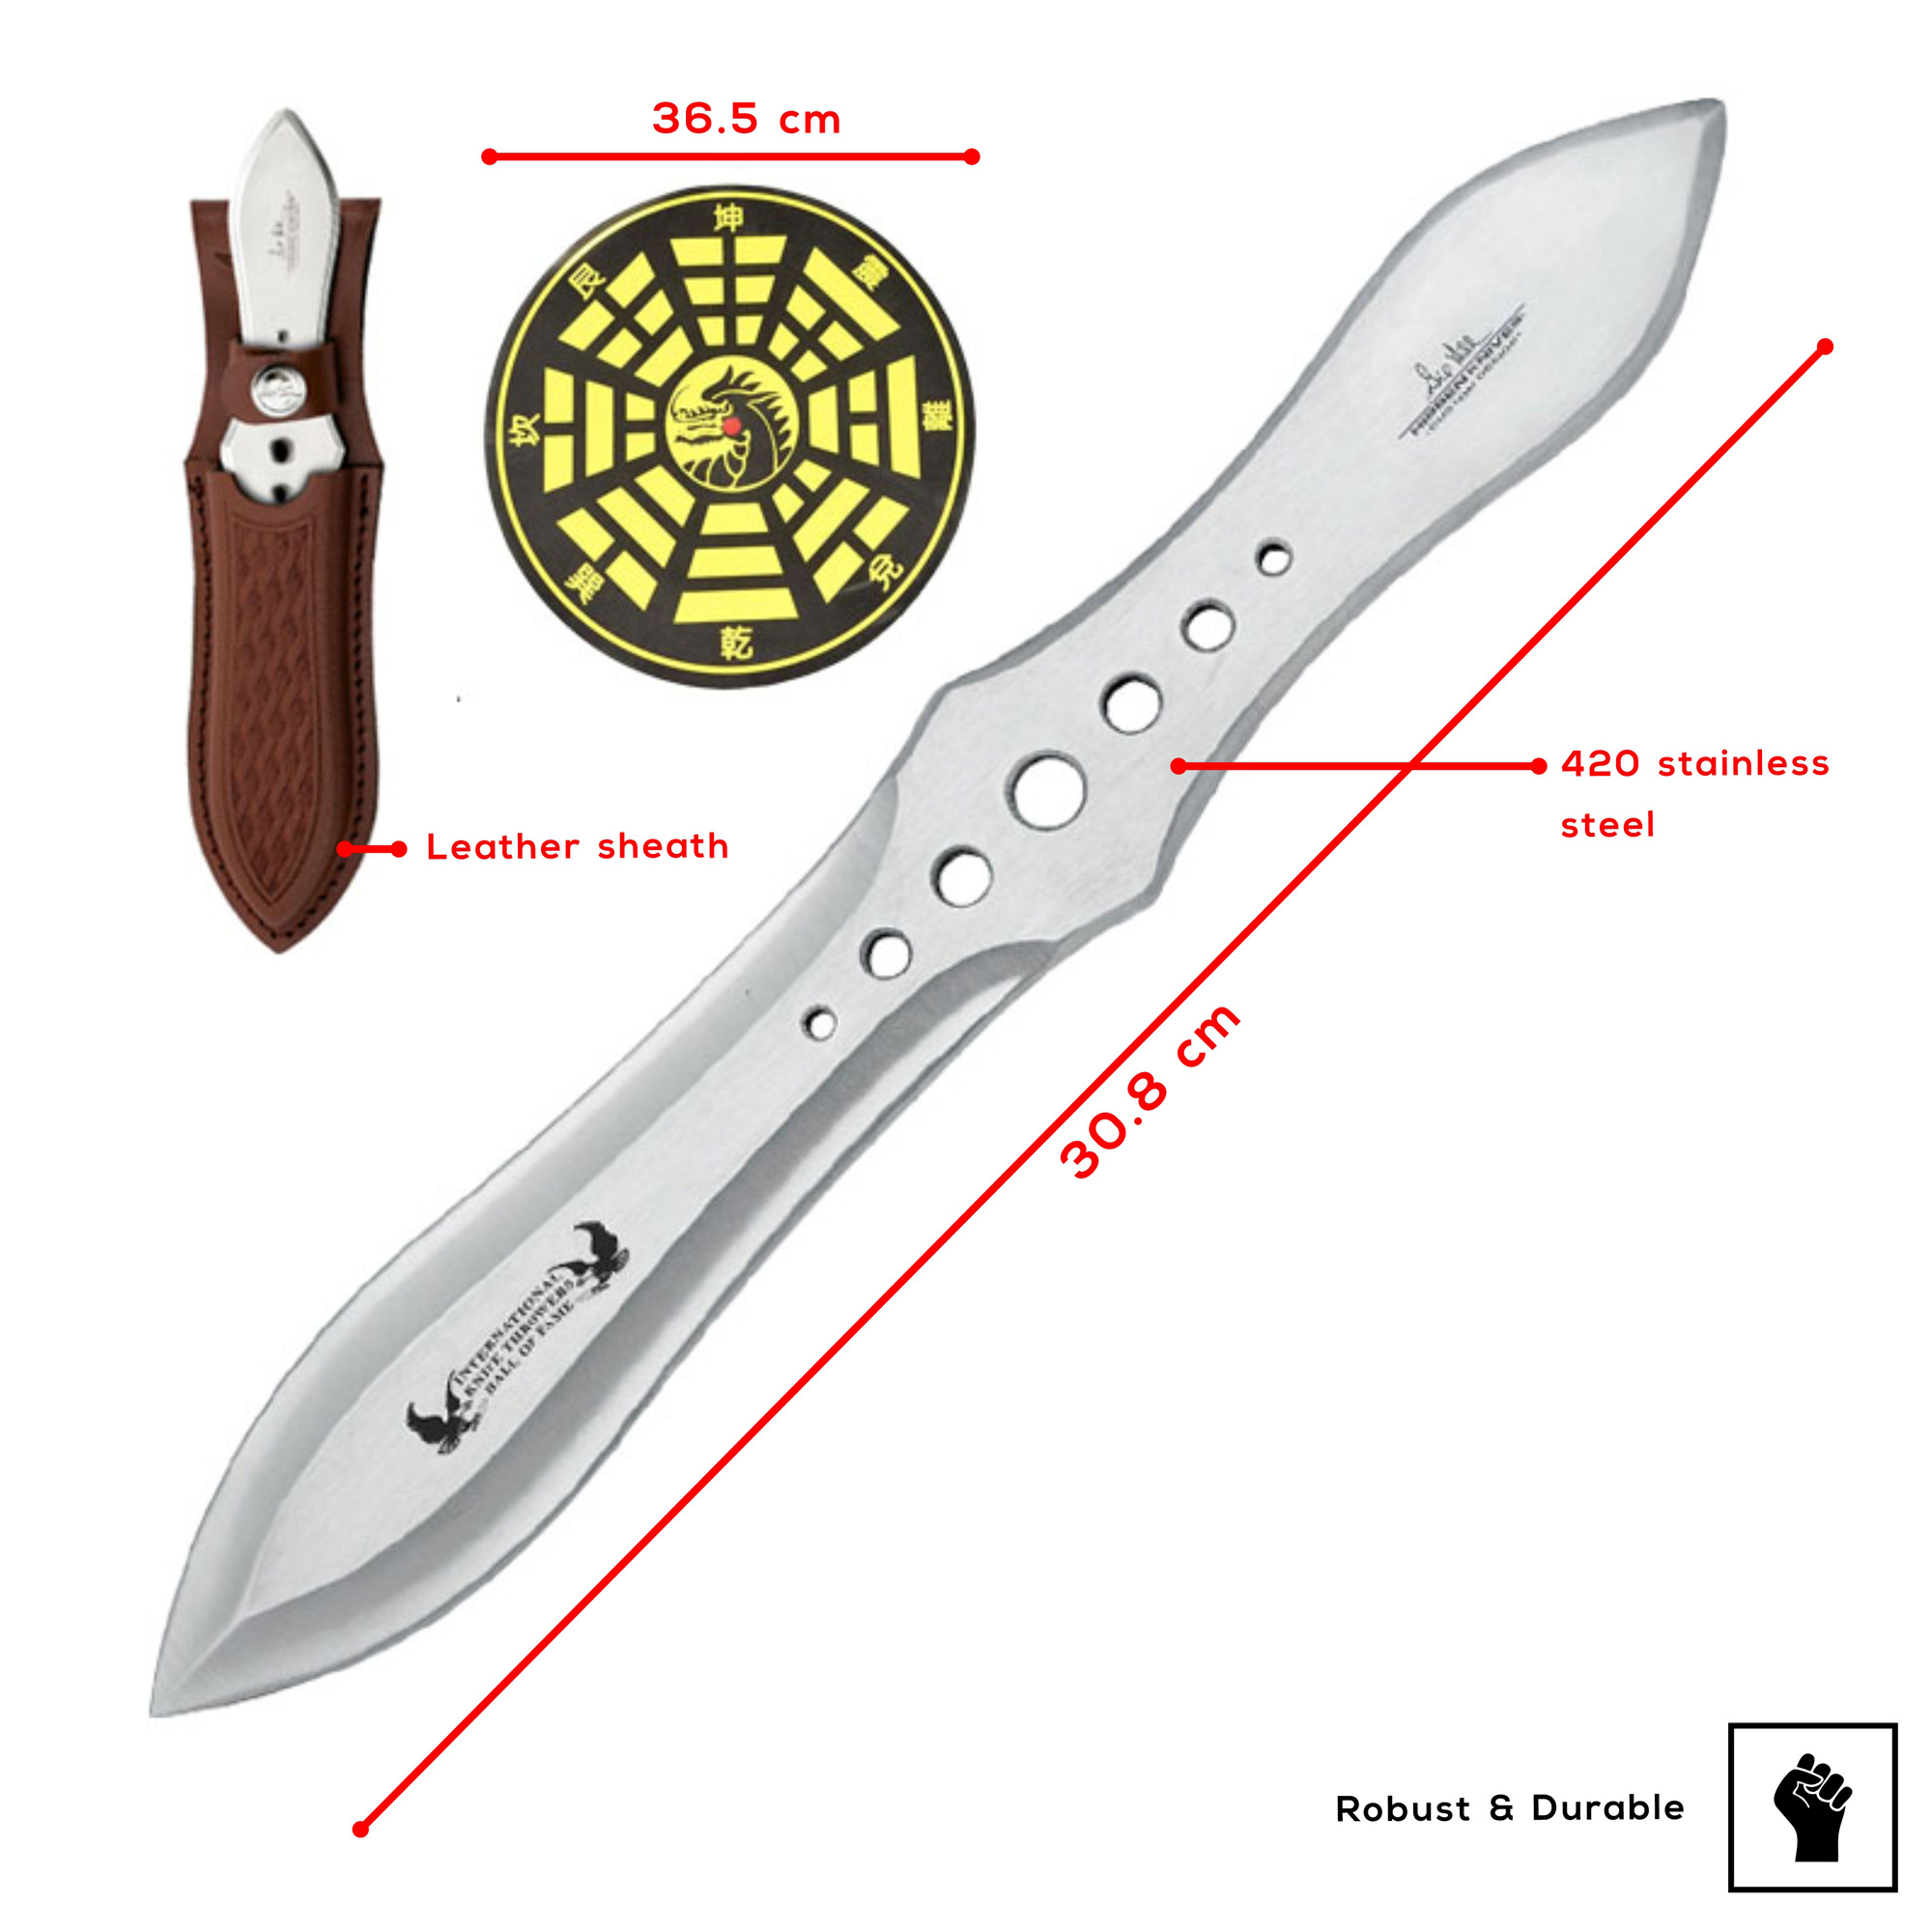 Hibben Competition Thrower Triple Set with Target